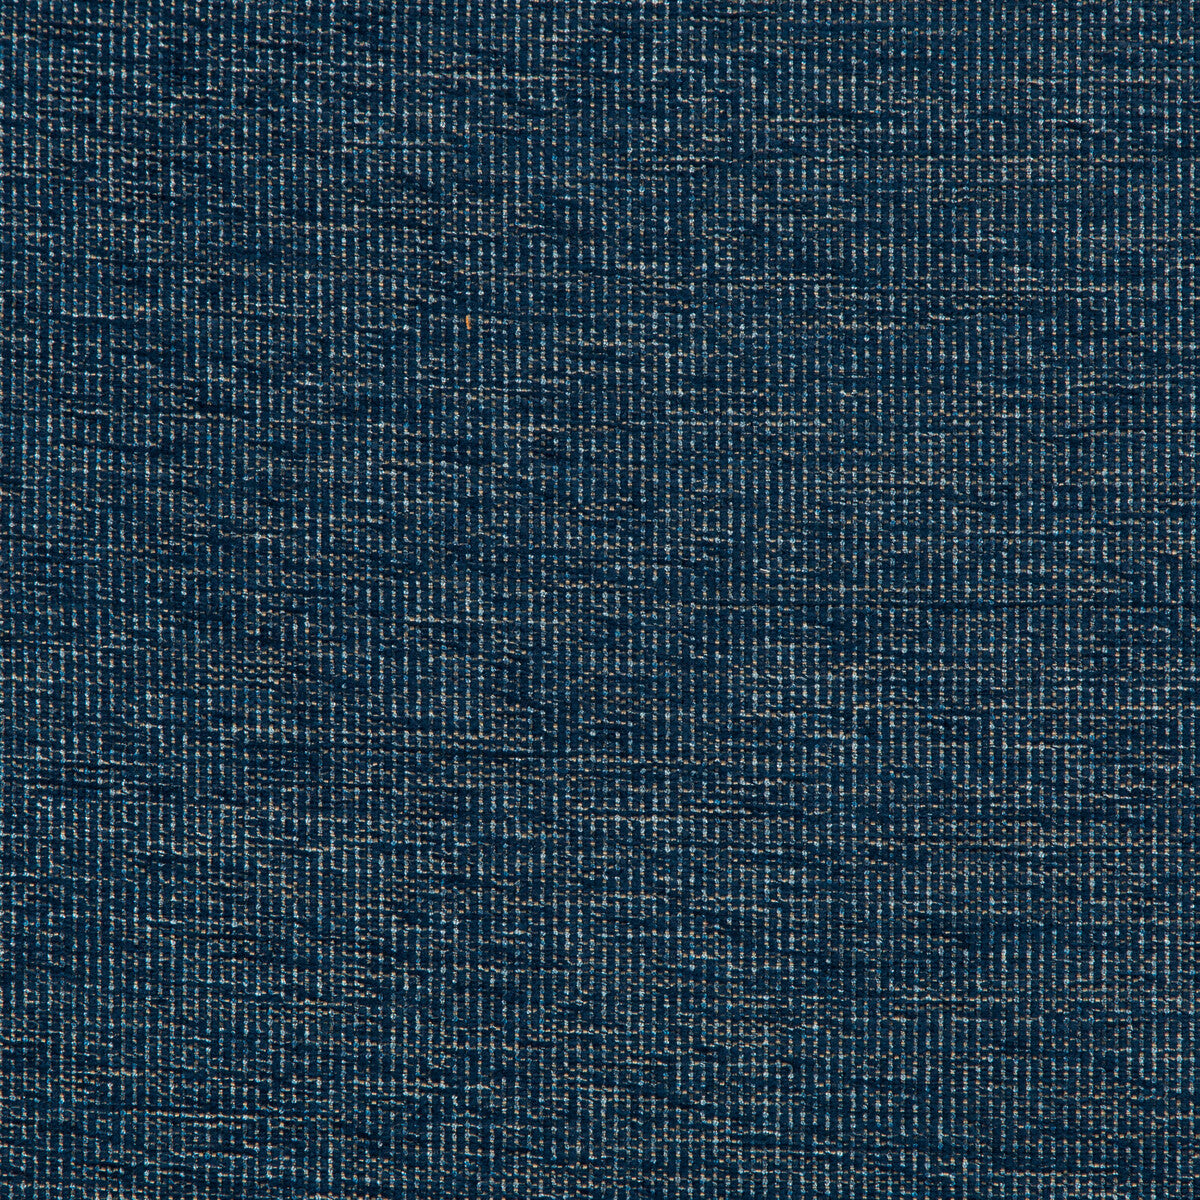 Kravet Design fabric in 36093-50 color - pattern 36093.50.0 - by Kravet Design in the Inside Out Performance Fabrics collection